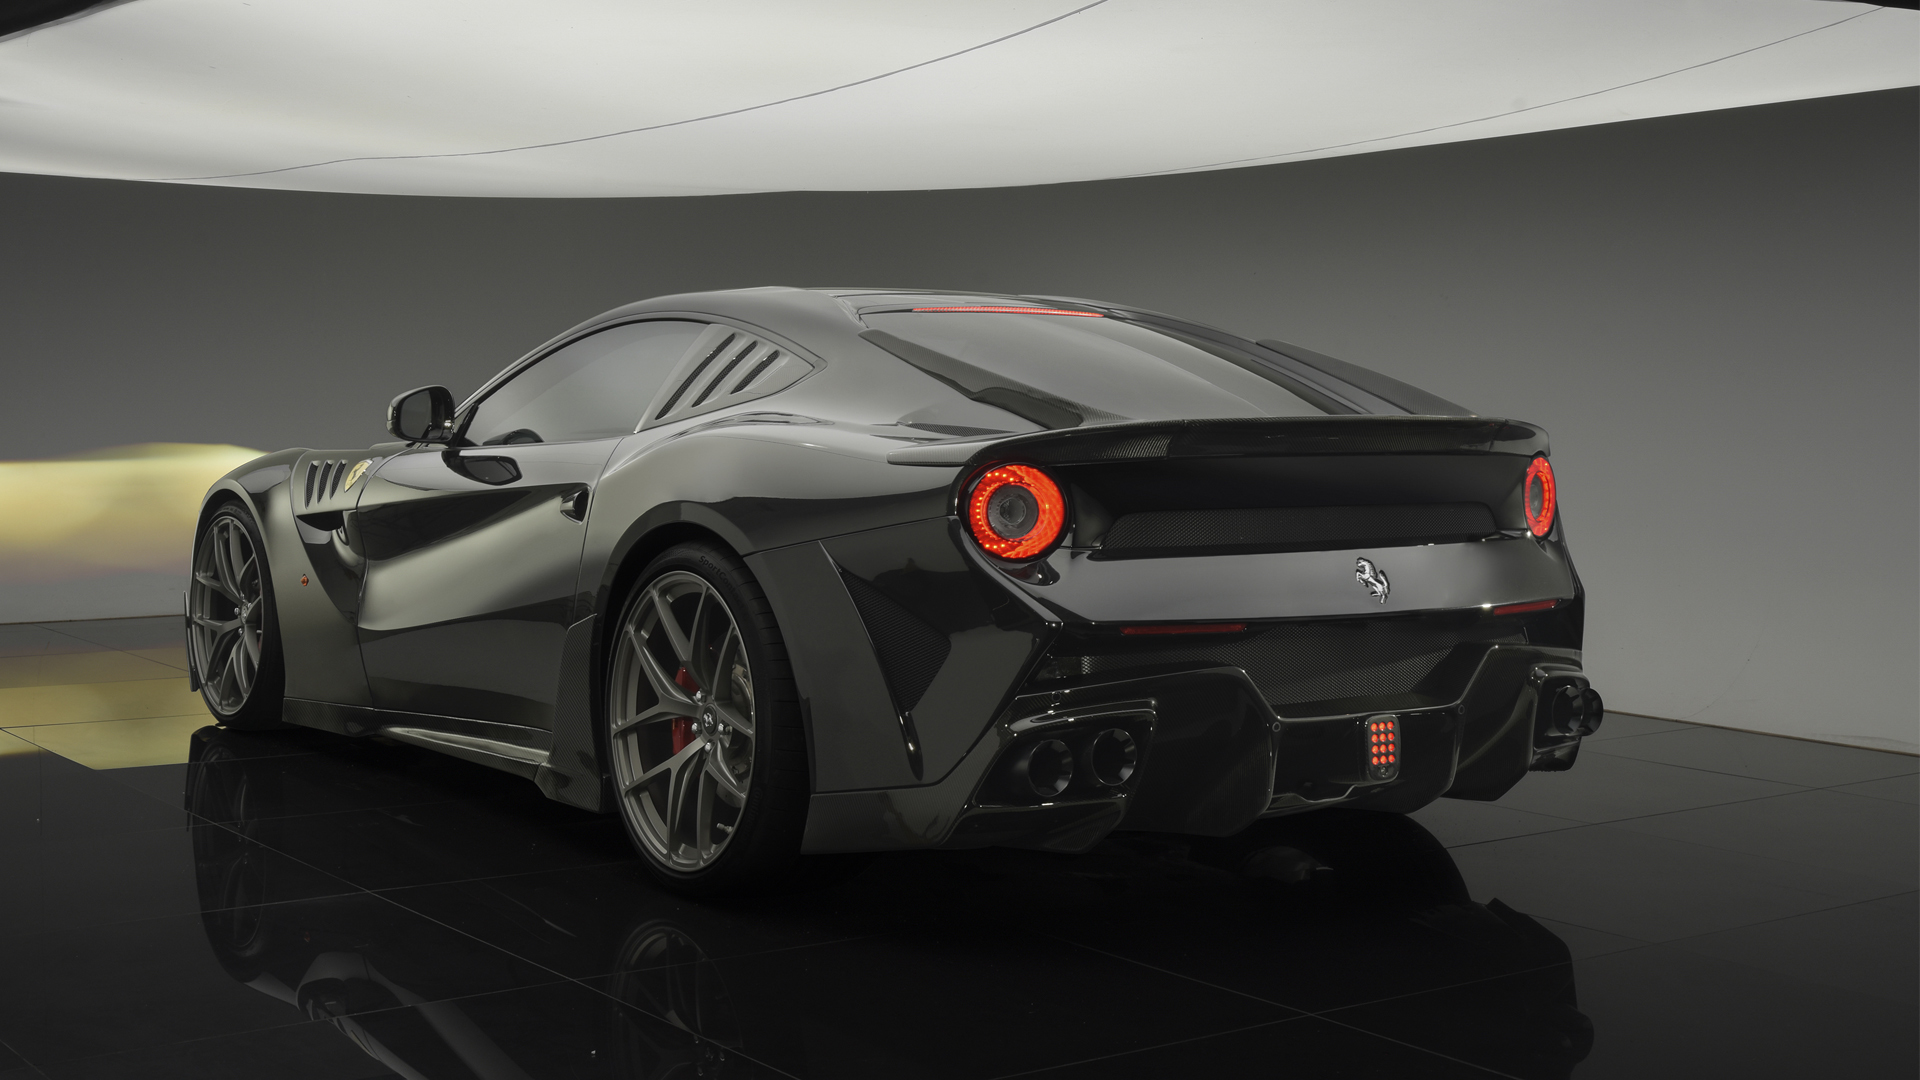 Check our price and buy Onyx body kit for Ferrari F12 berlinetta